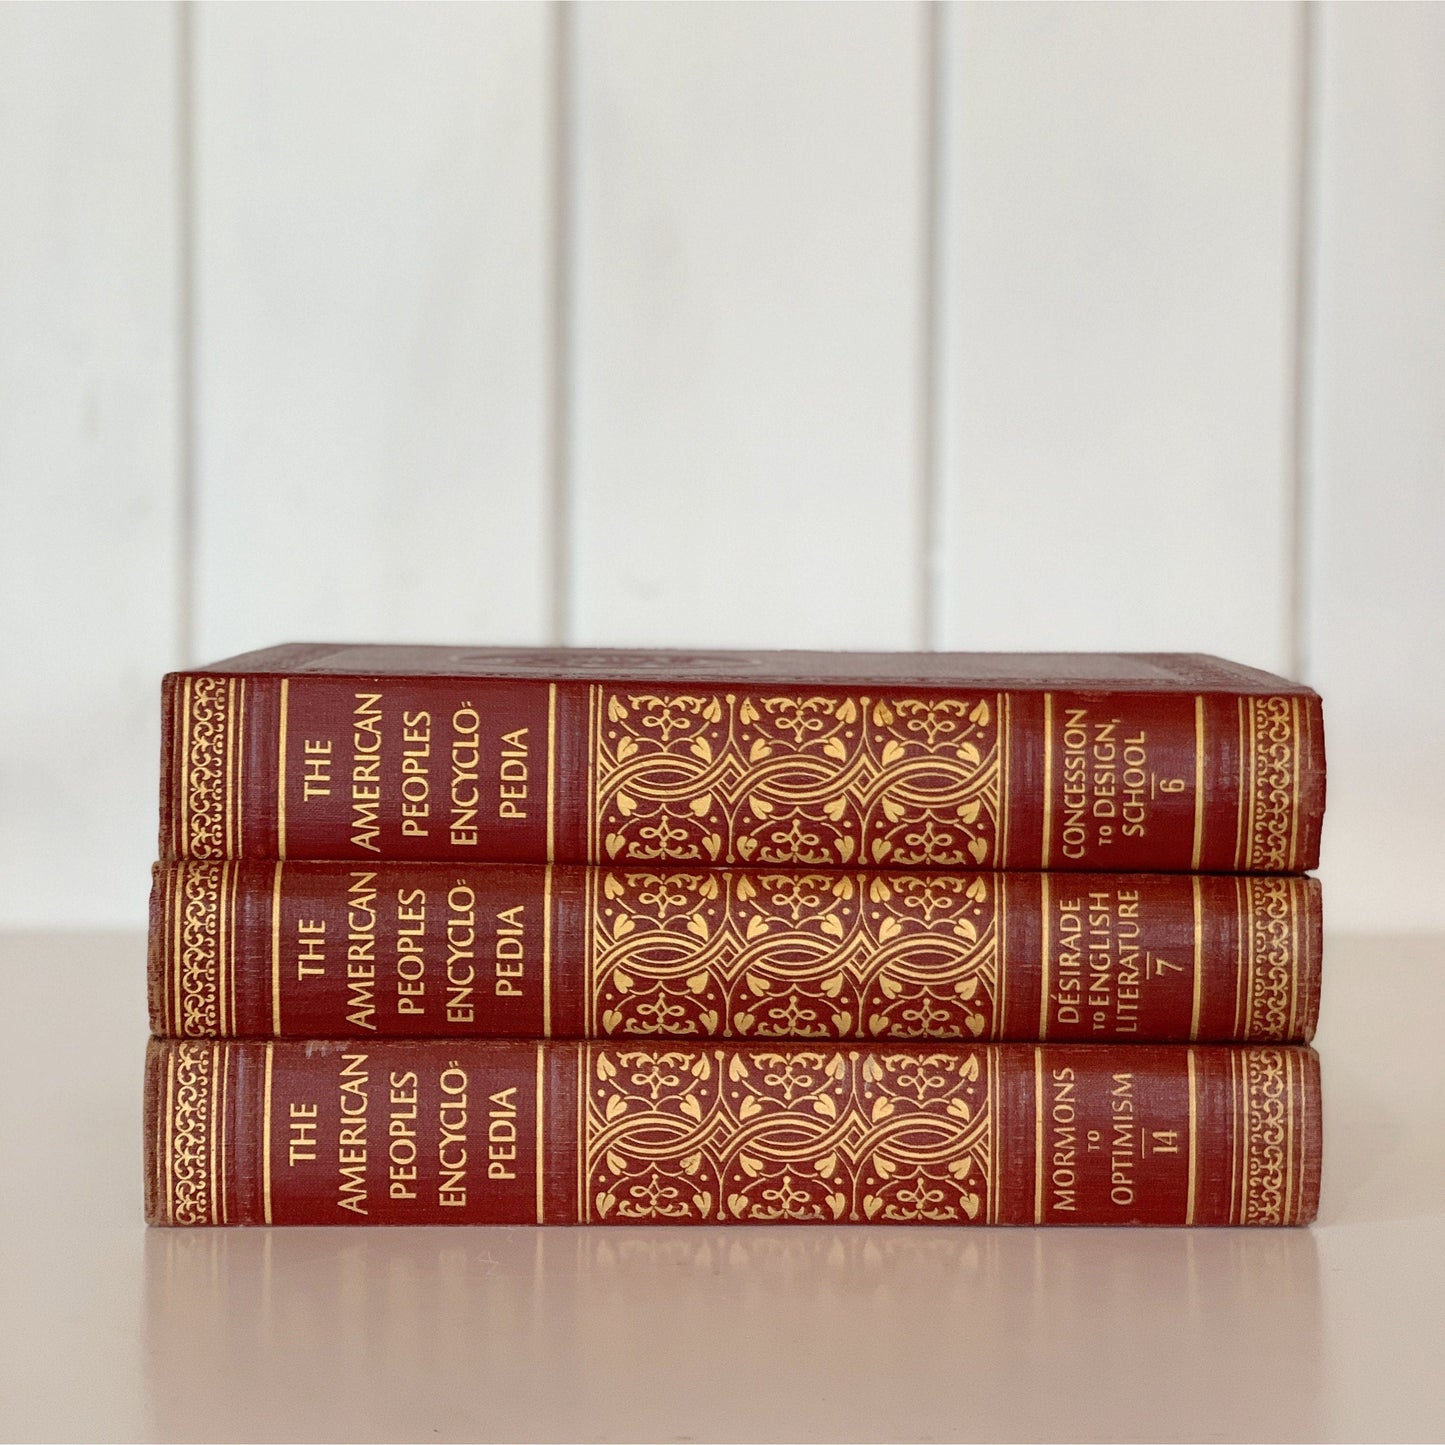 Vintage Red and Gold Ornate Books, The American People’s Encyclopedia, 1951